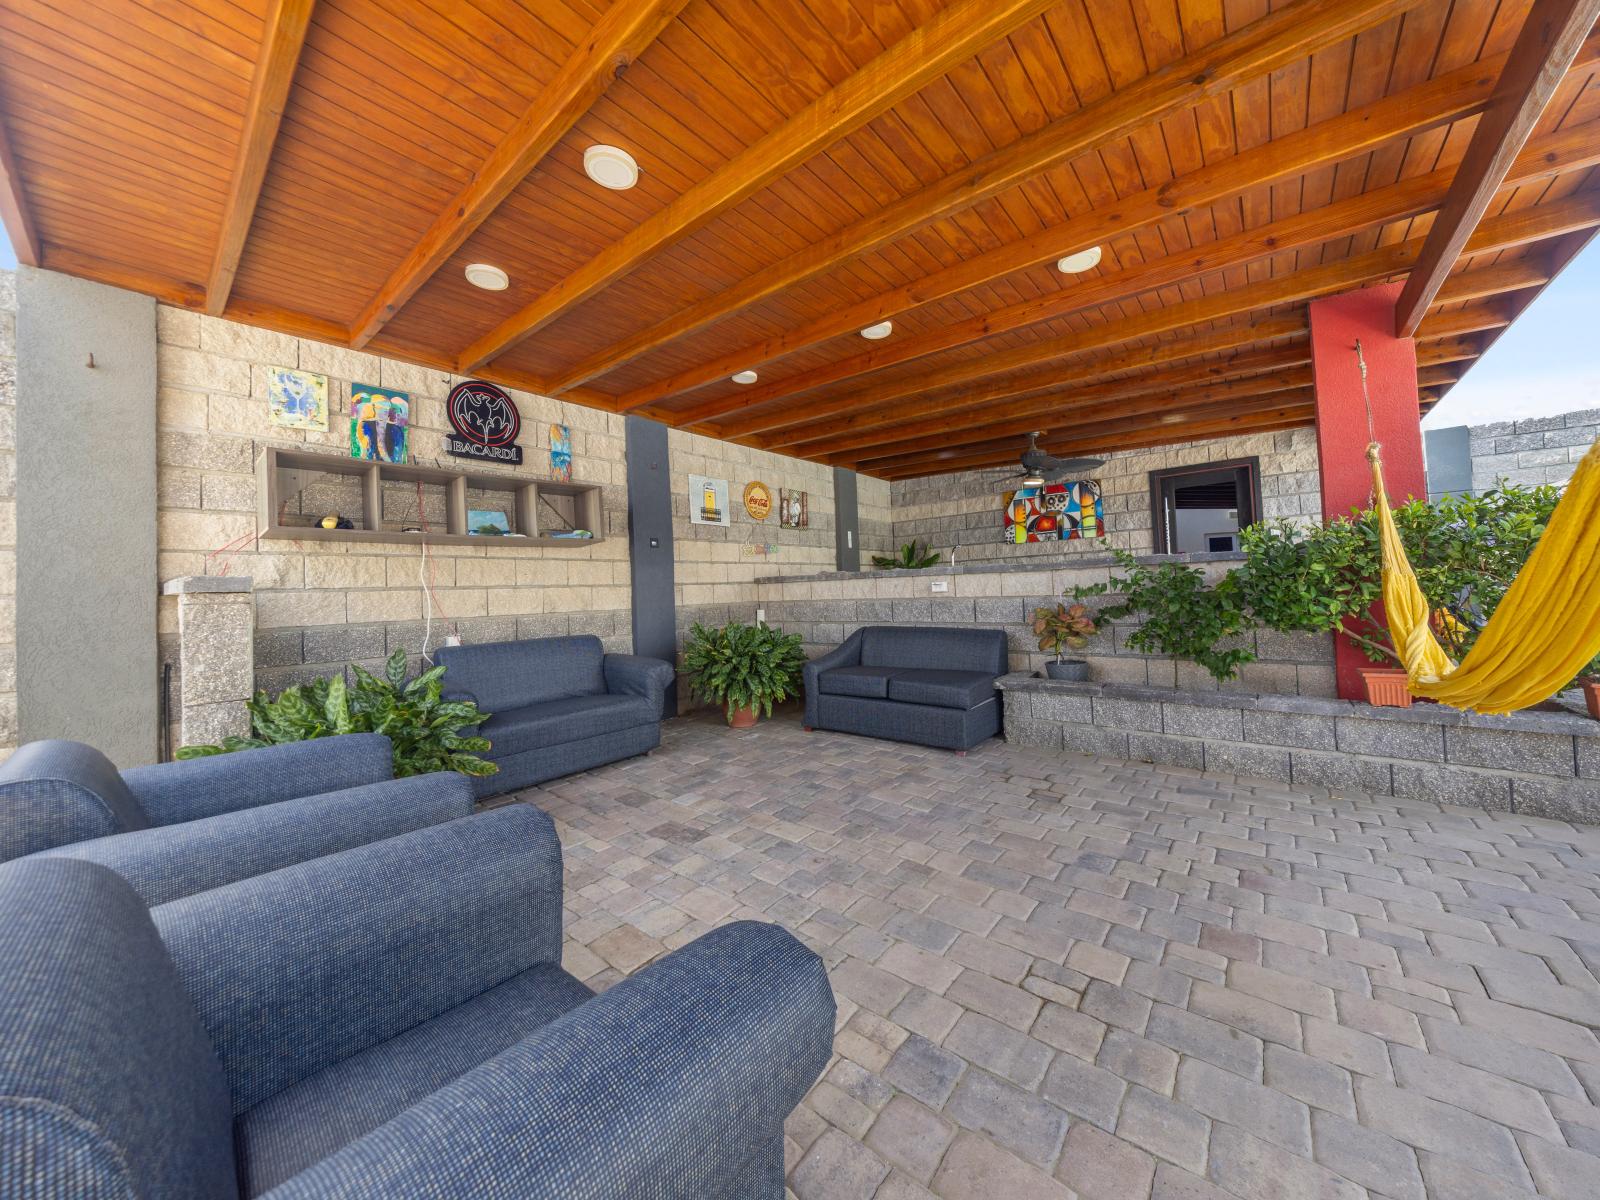 Experience the joy of outdoor living with cozy seating area of the home in Aruba - Discover outdoor relaxation in this cozy seating space, ideal for enjoying the fresh air - Relax in this tranquil outdoors, surrounded by greenery and views